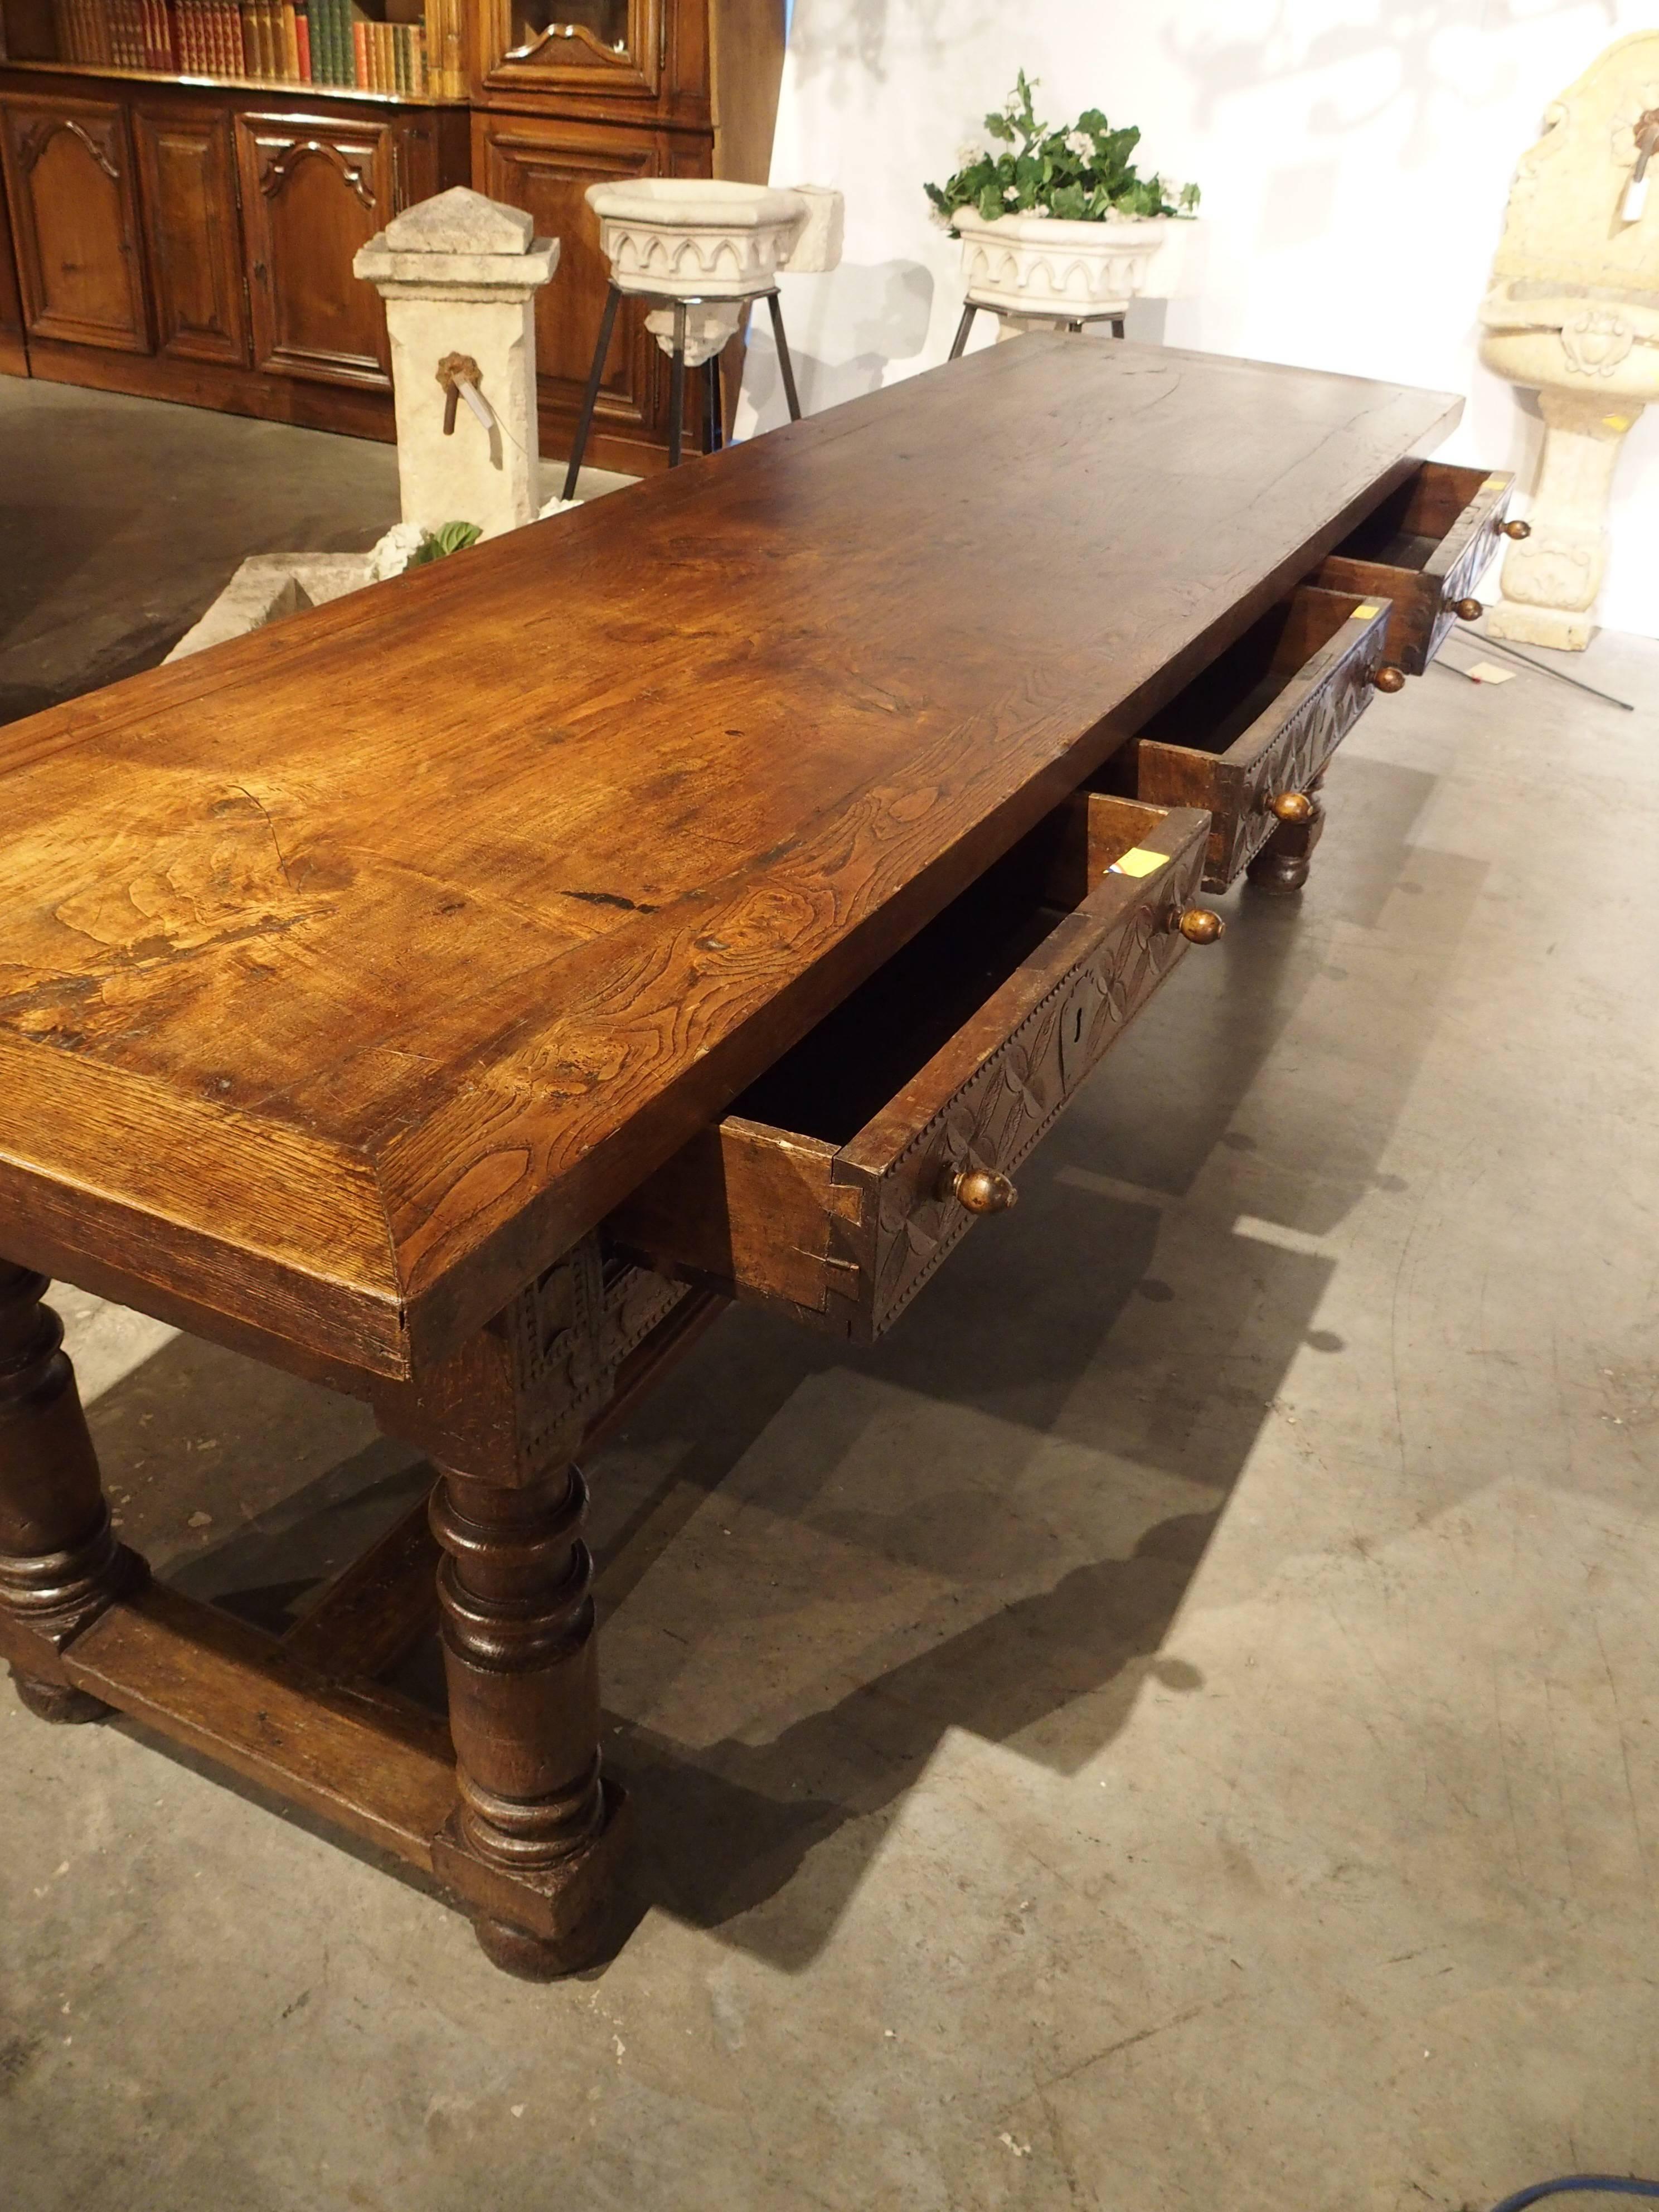 This wonderful antique refectory table from Spain dates to the 1700’s.  The apron has three drawers with two knobs per drawer as pulls. The front and back portions of the apron have motifs of floret and varying linear scoop motifs. There are four